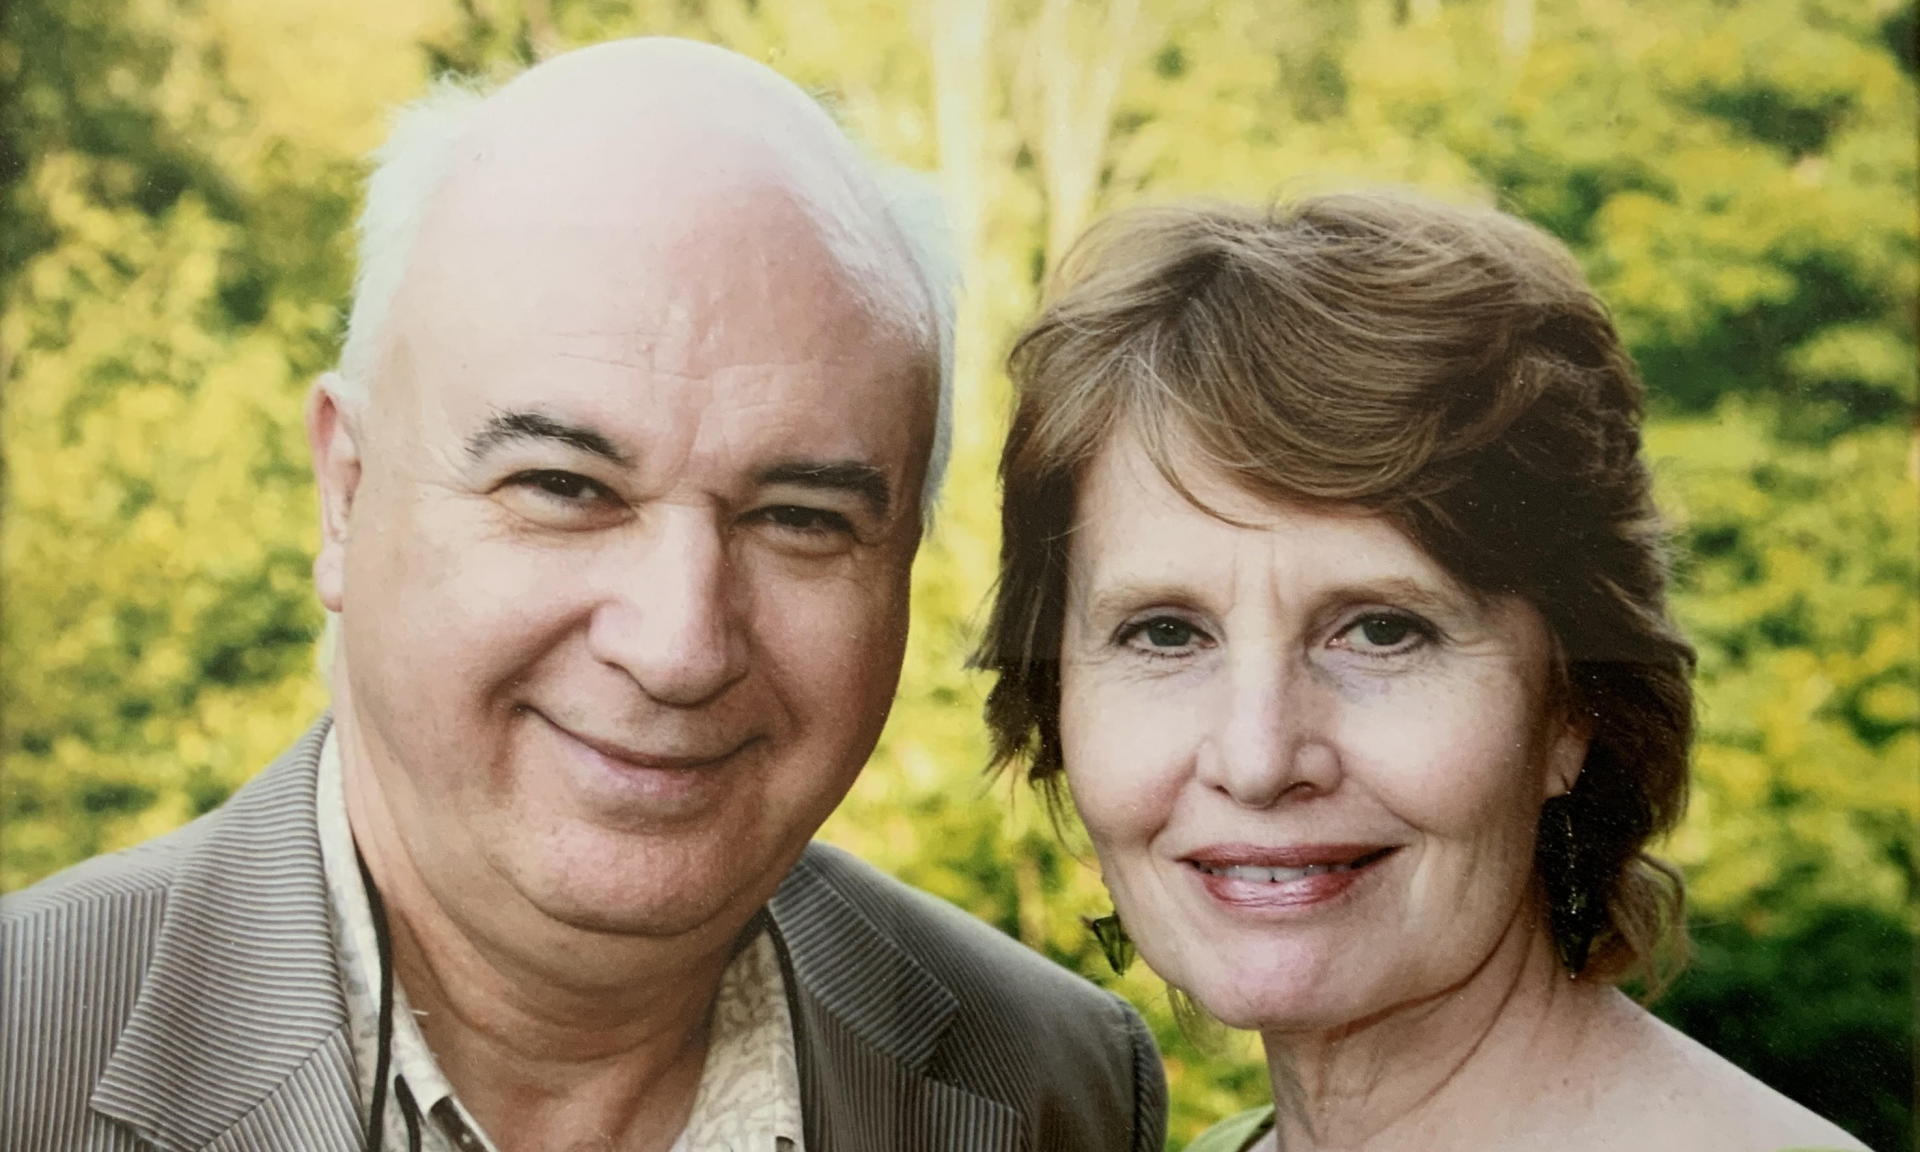 Stefan and Janice Sierakowski look at the camera with greenery behind them